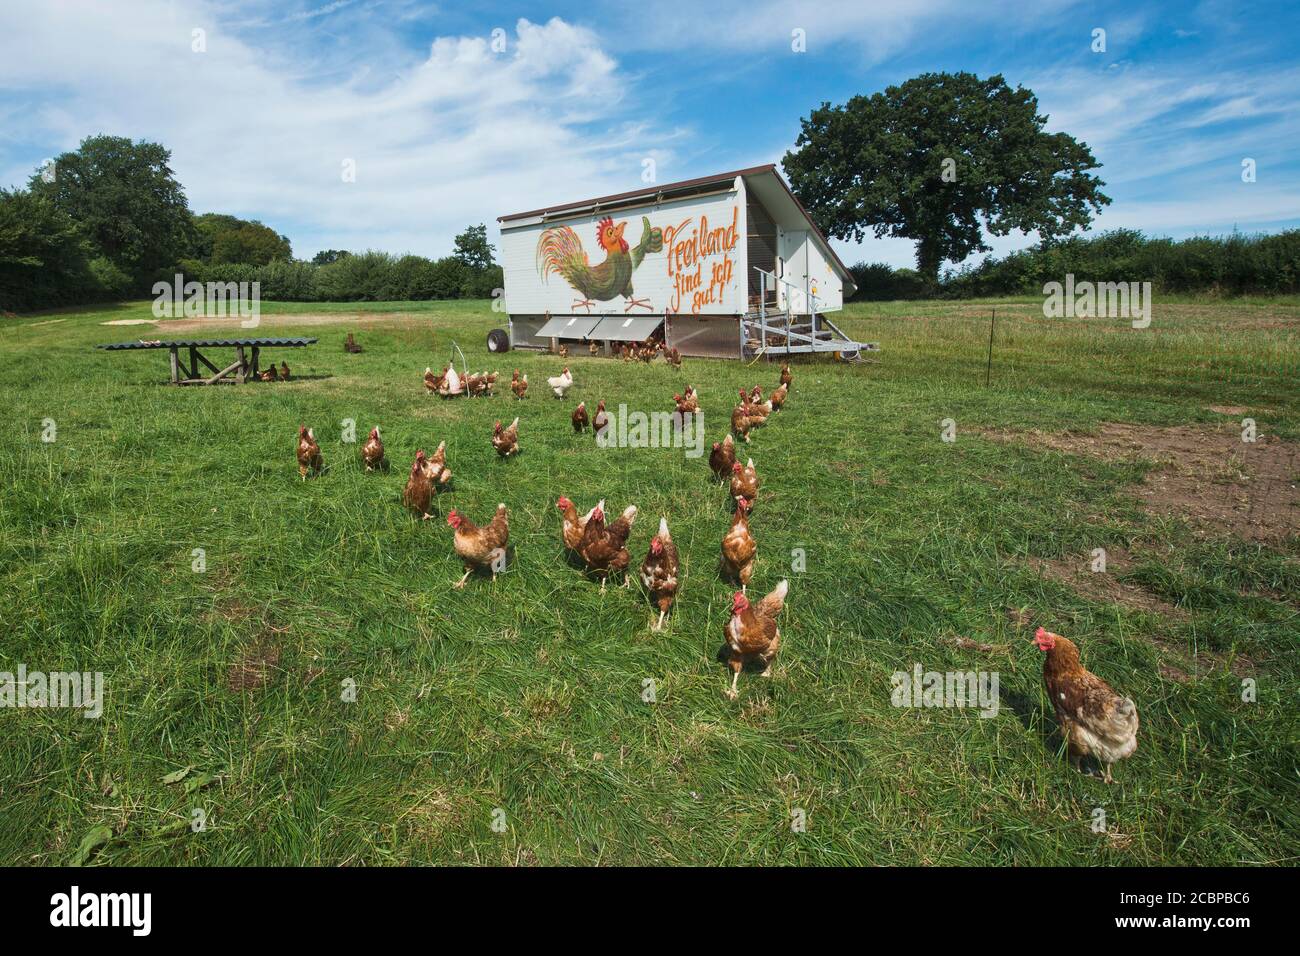 Laying hens (Gallus gallus domesticus), mobile chicken house, Schleswig-Holstein, Germany Stock Photo